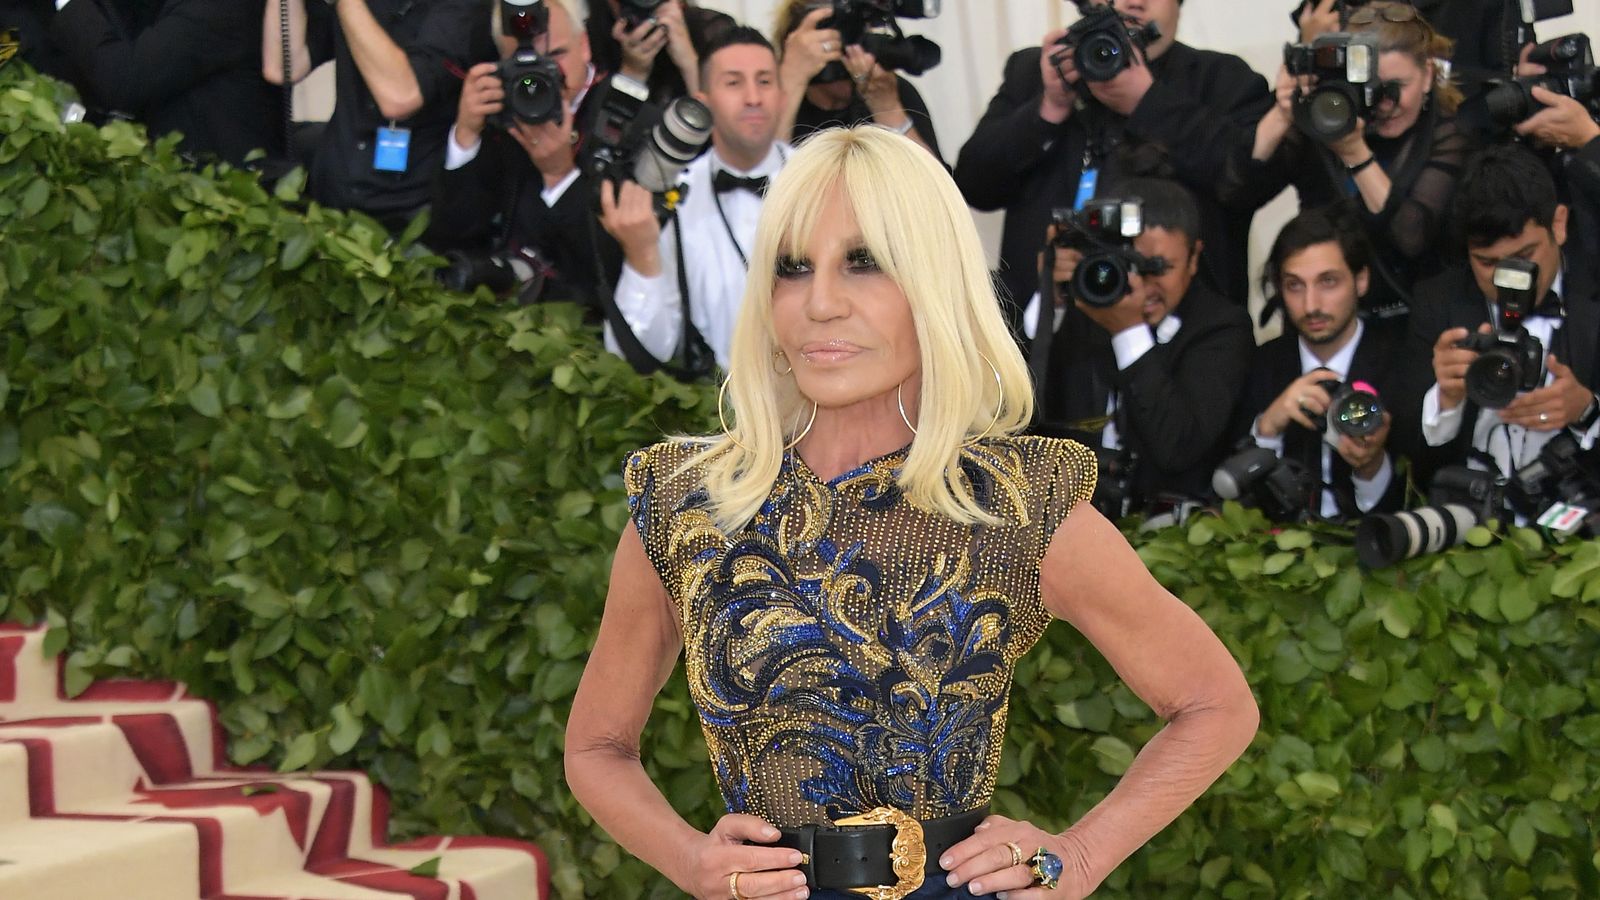 Versace fashion house bought by Michael Kors for $2.1bn to make super ...